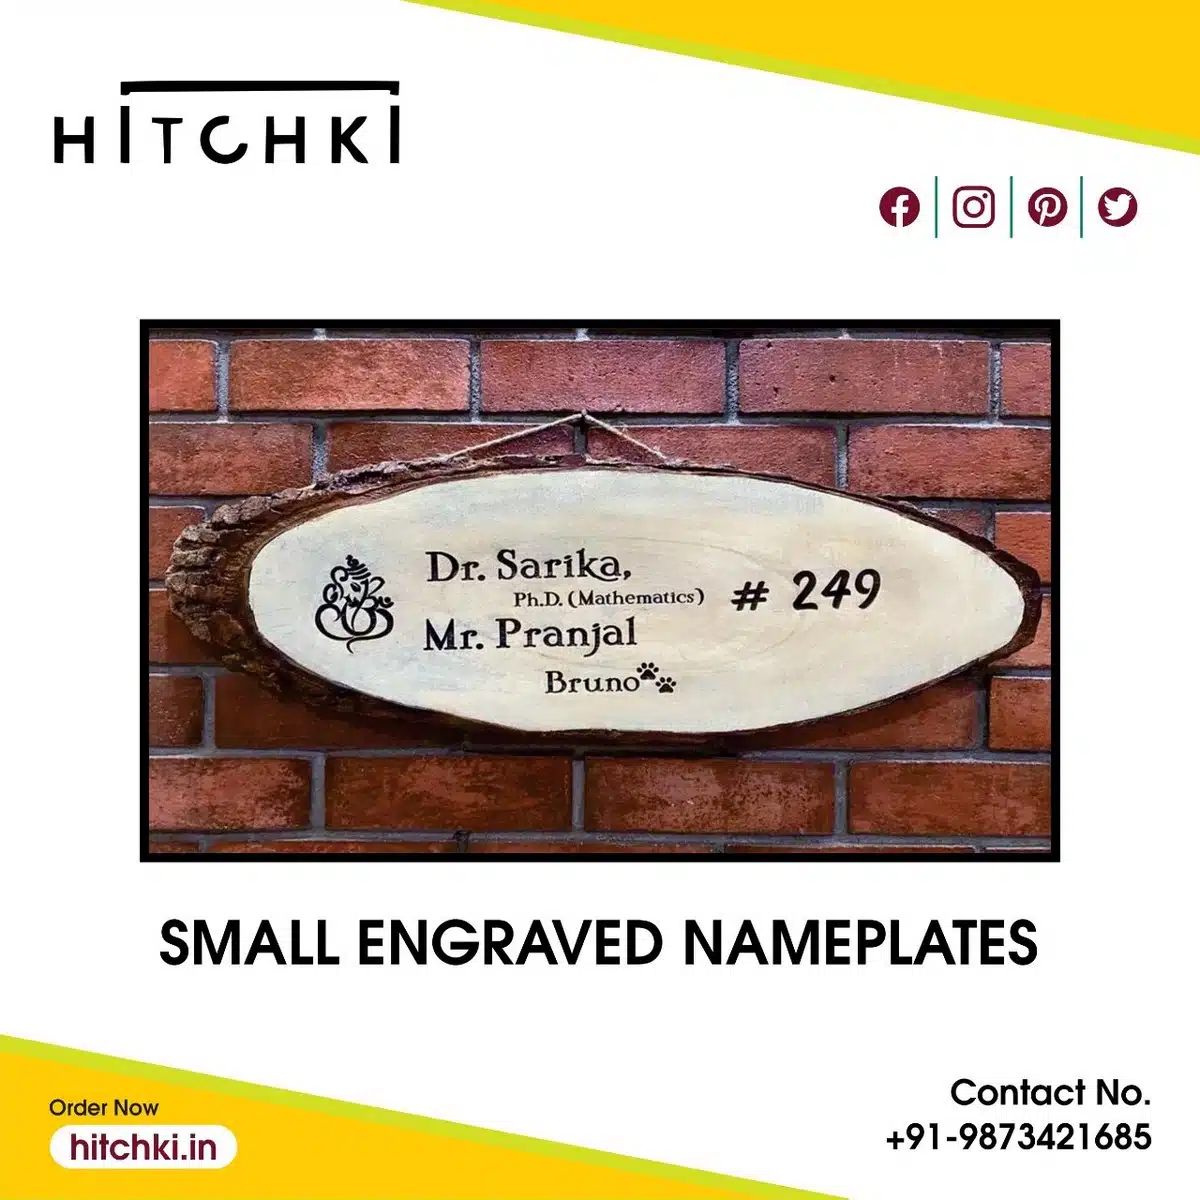 Small Engraved Nameplates For Artistic Effect